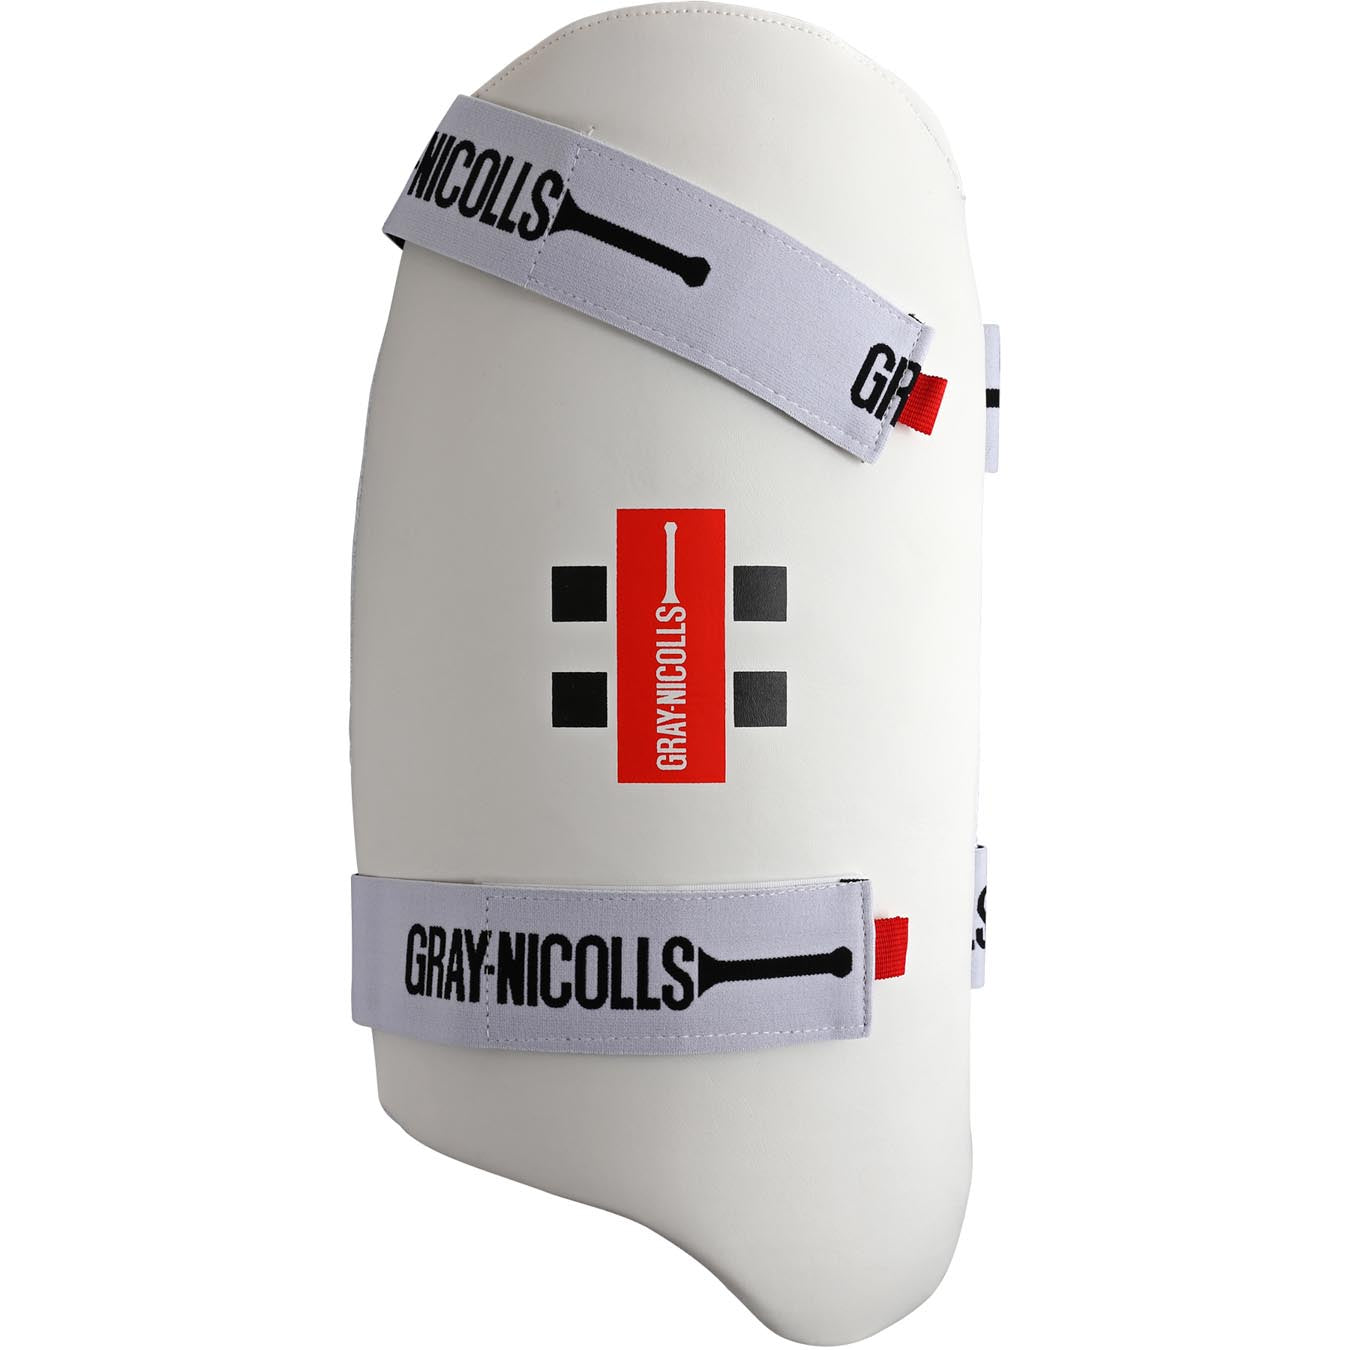 CPBC16Protection Thigh Pad Test